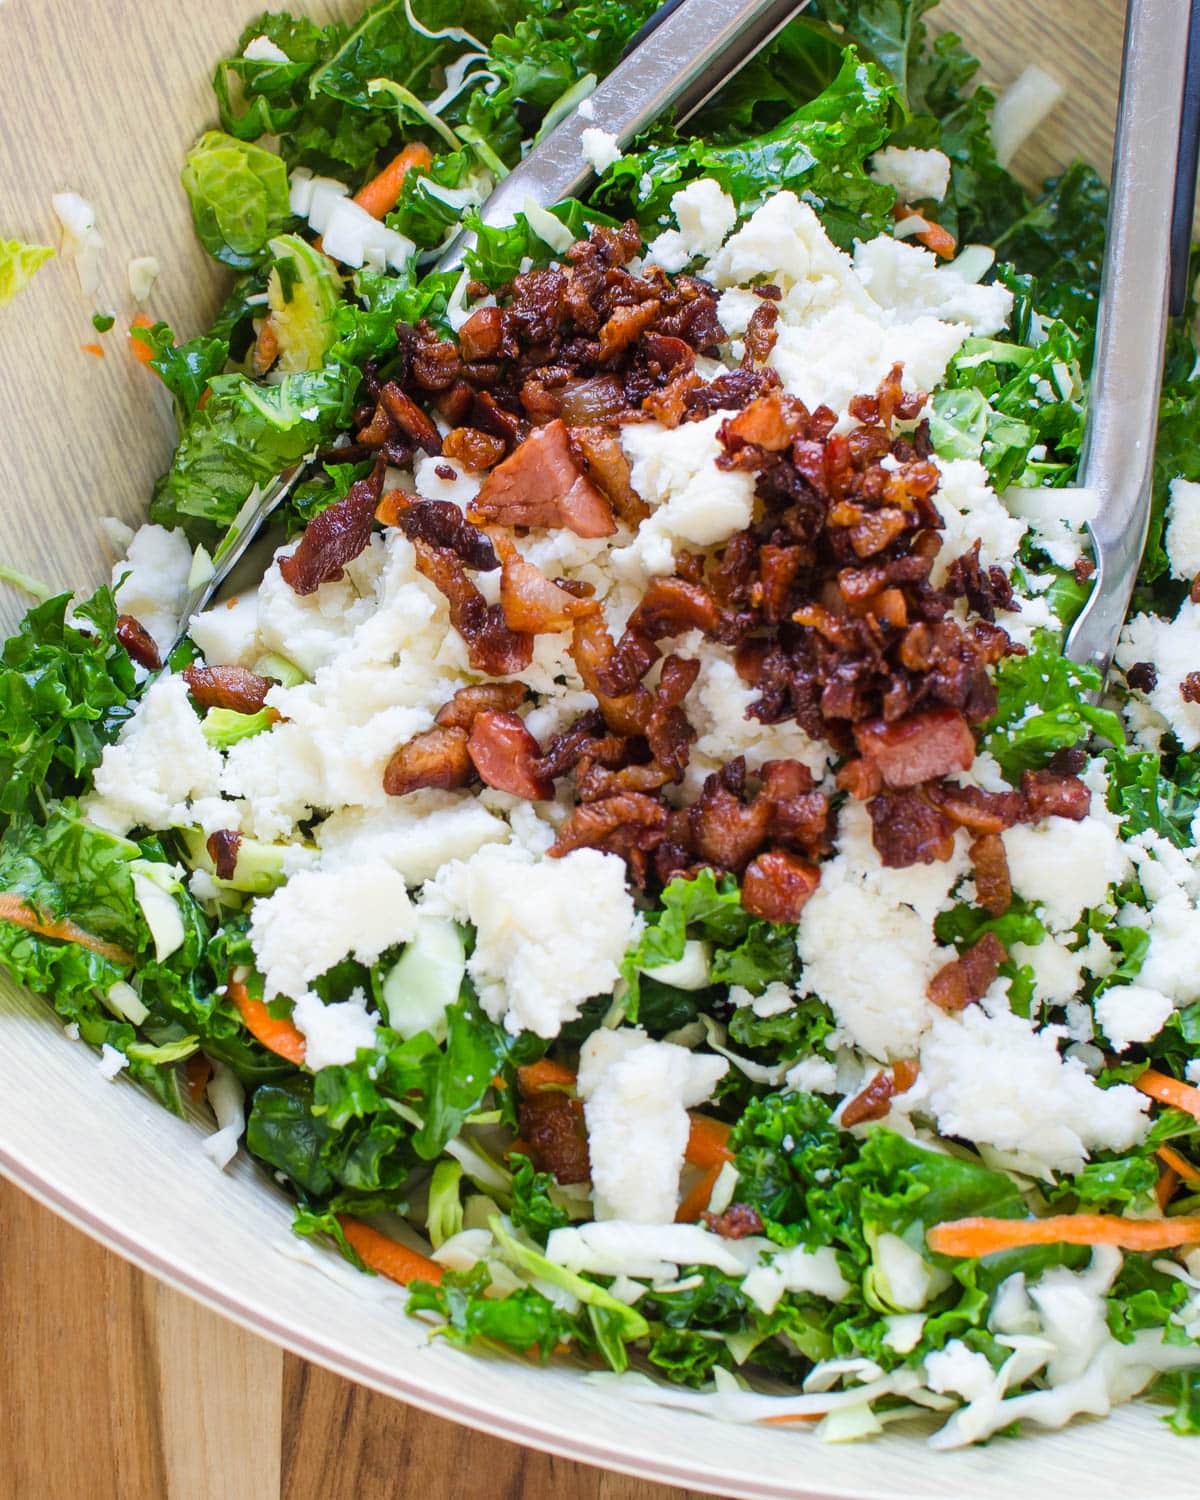 tossing in crumbled cheese and pancetta with the salad ingredients. 